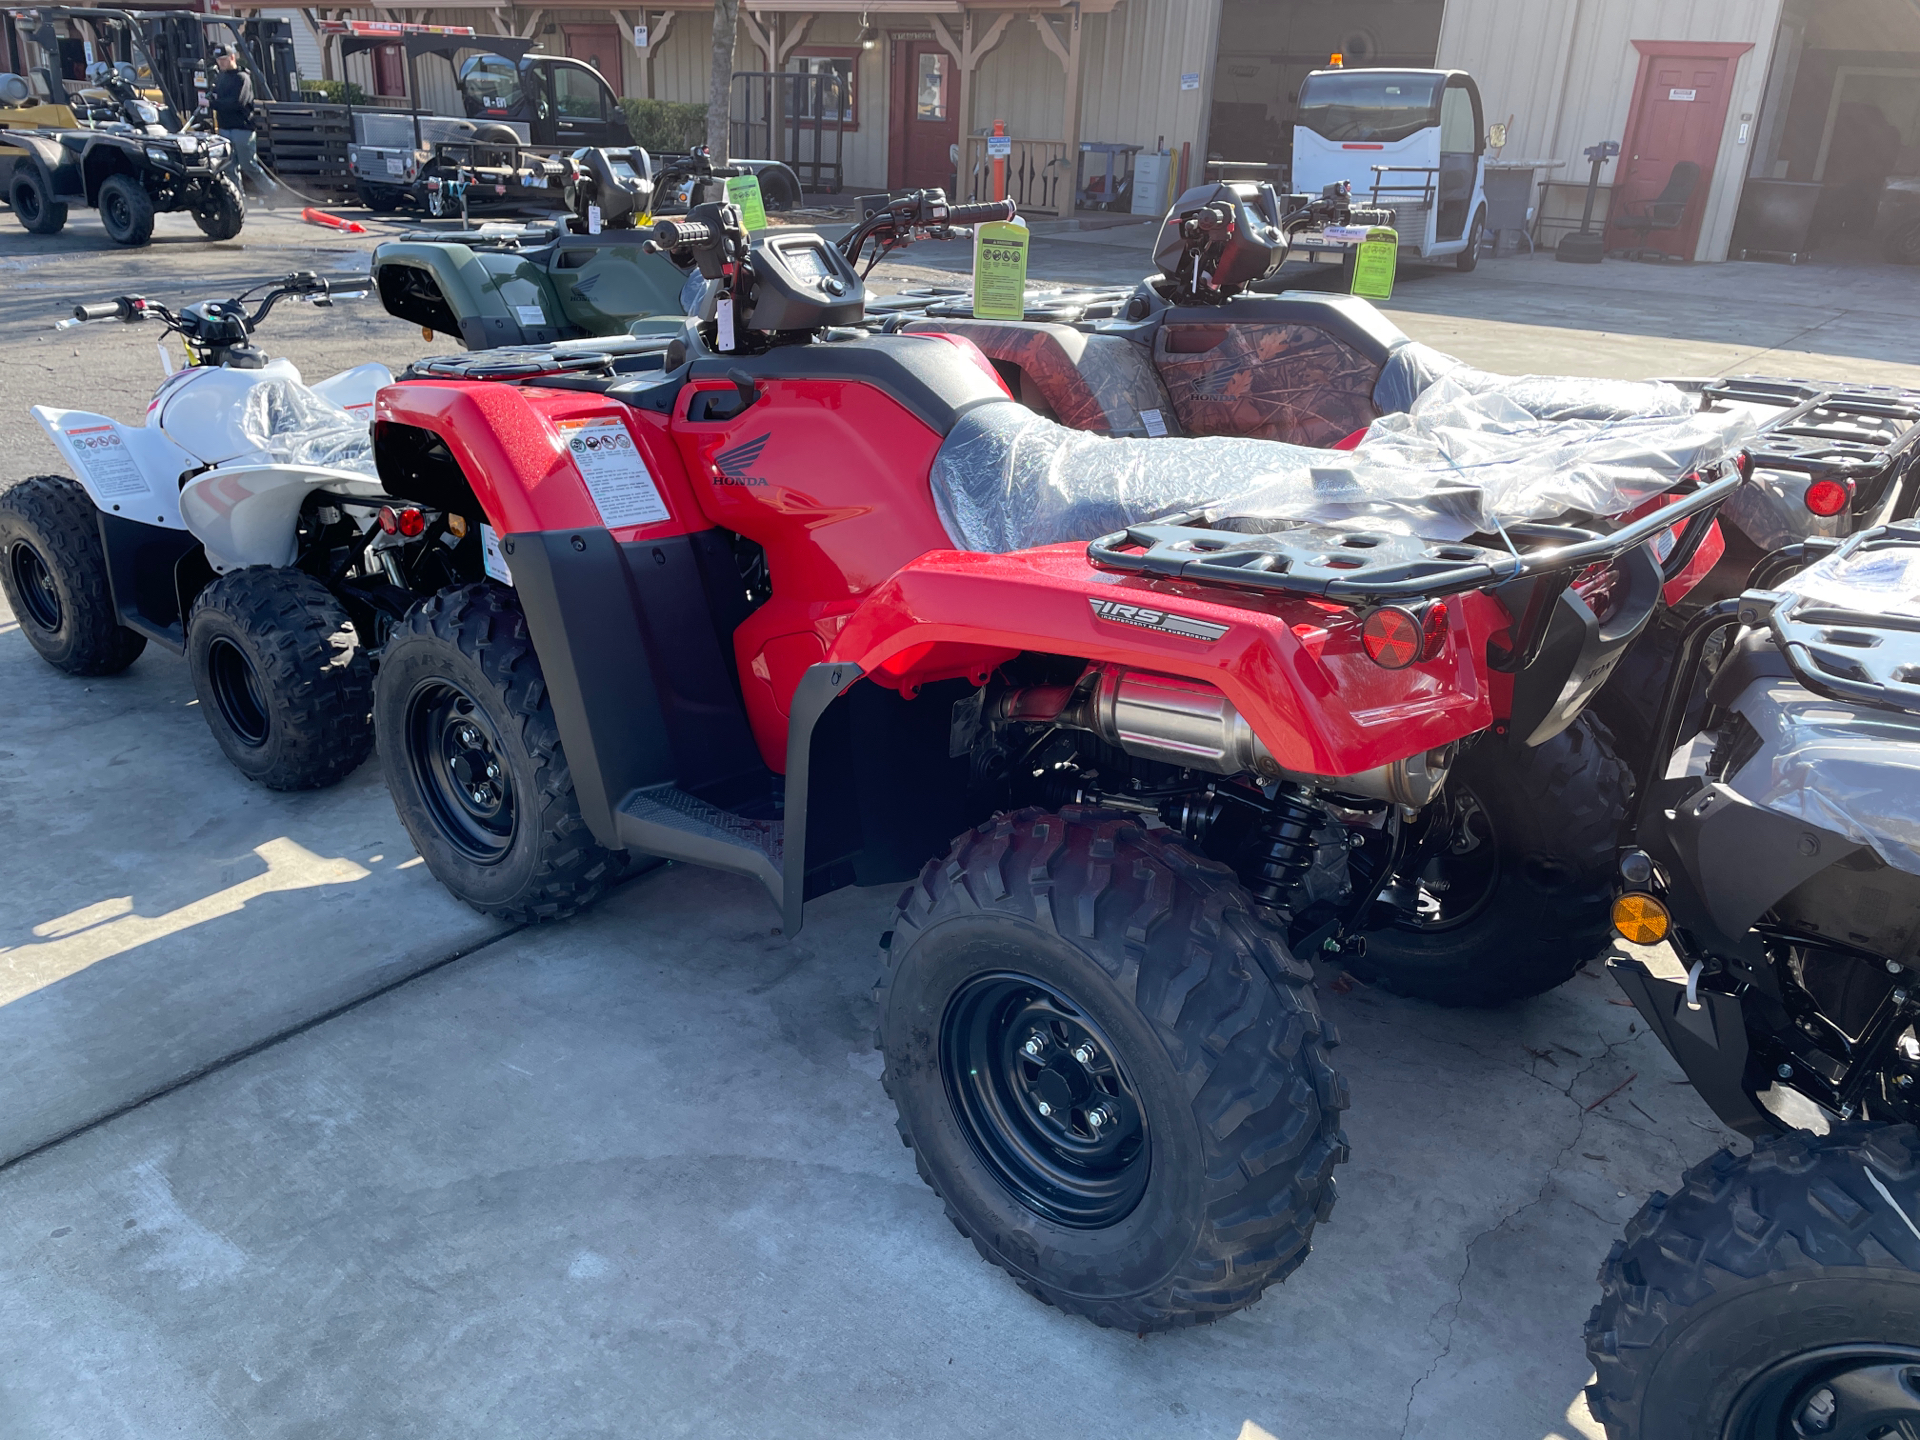 2022 Honda FourTrax Rancher 4x4 Automatic DCT IRS EPS in Paso Robles, California - Photo 2